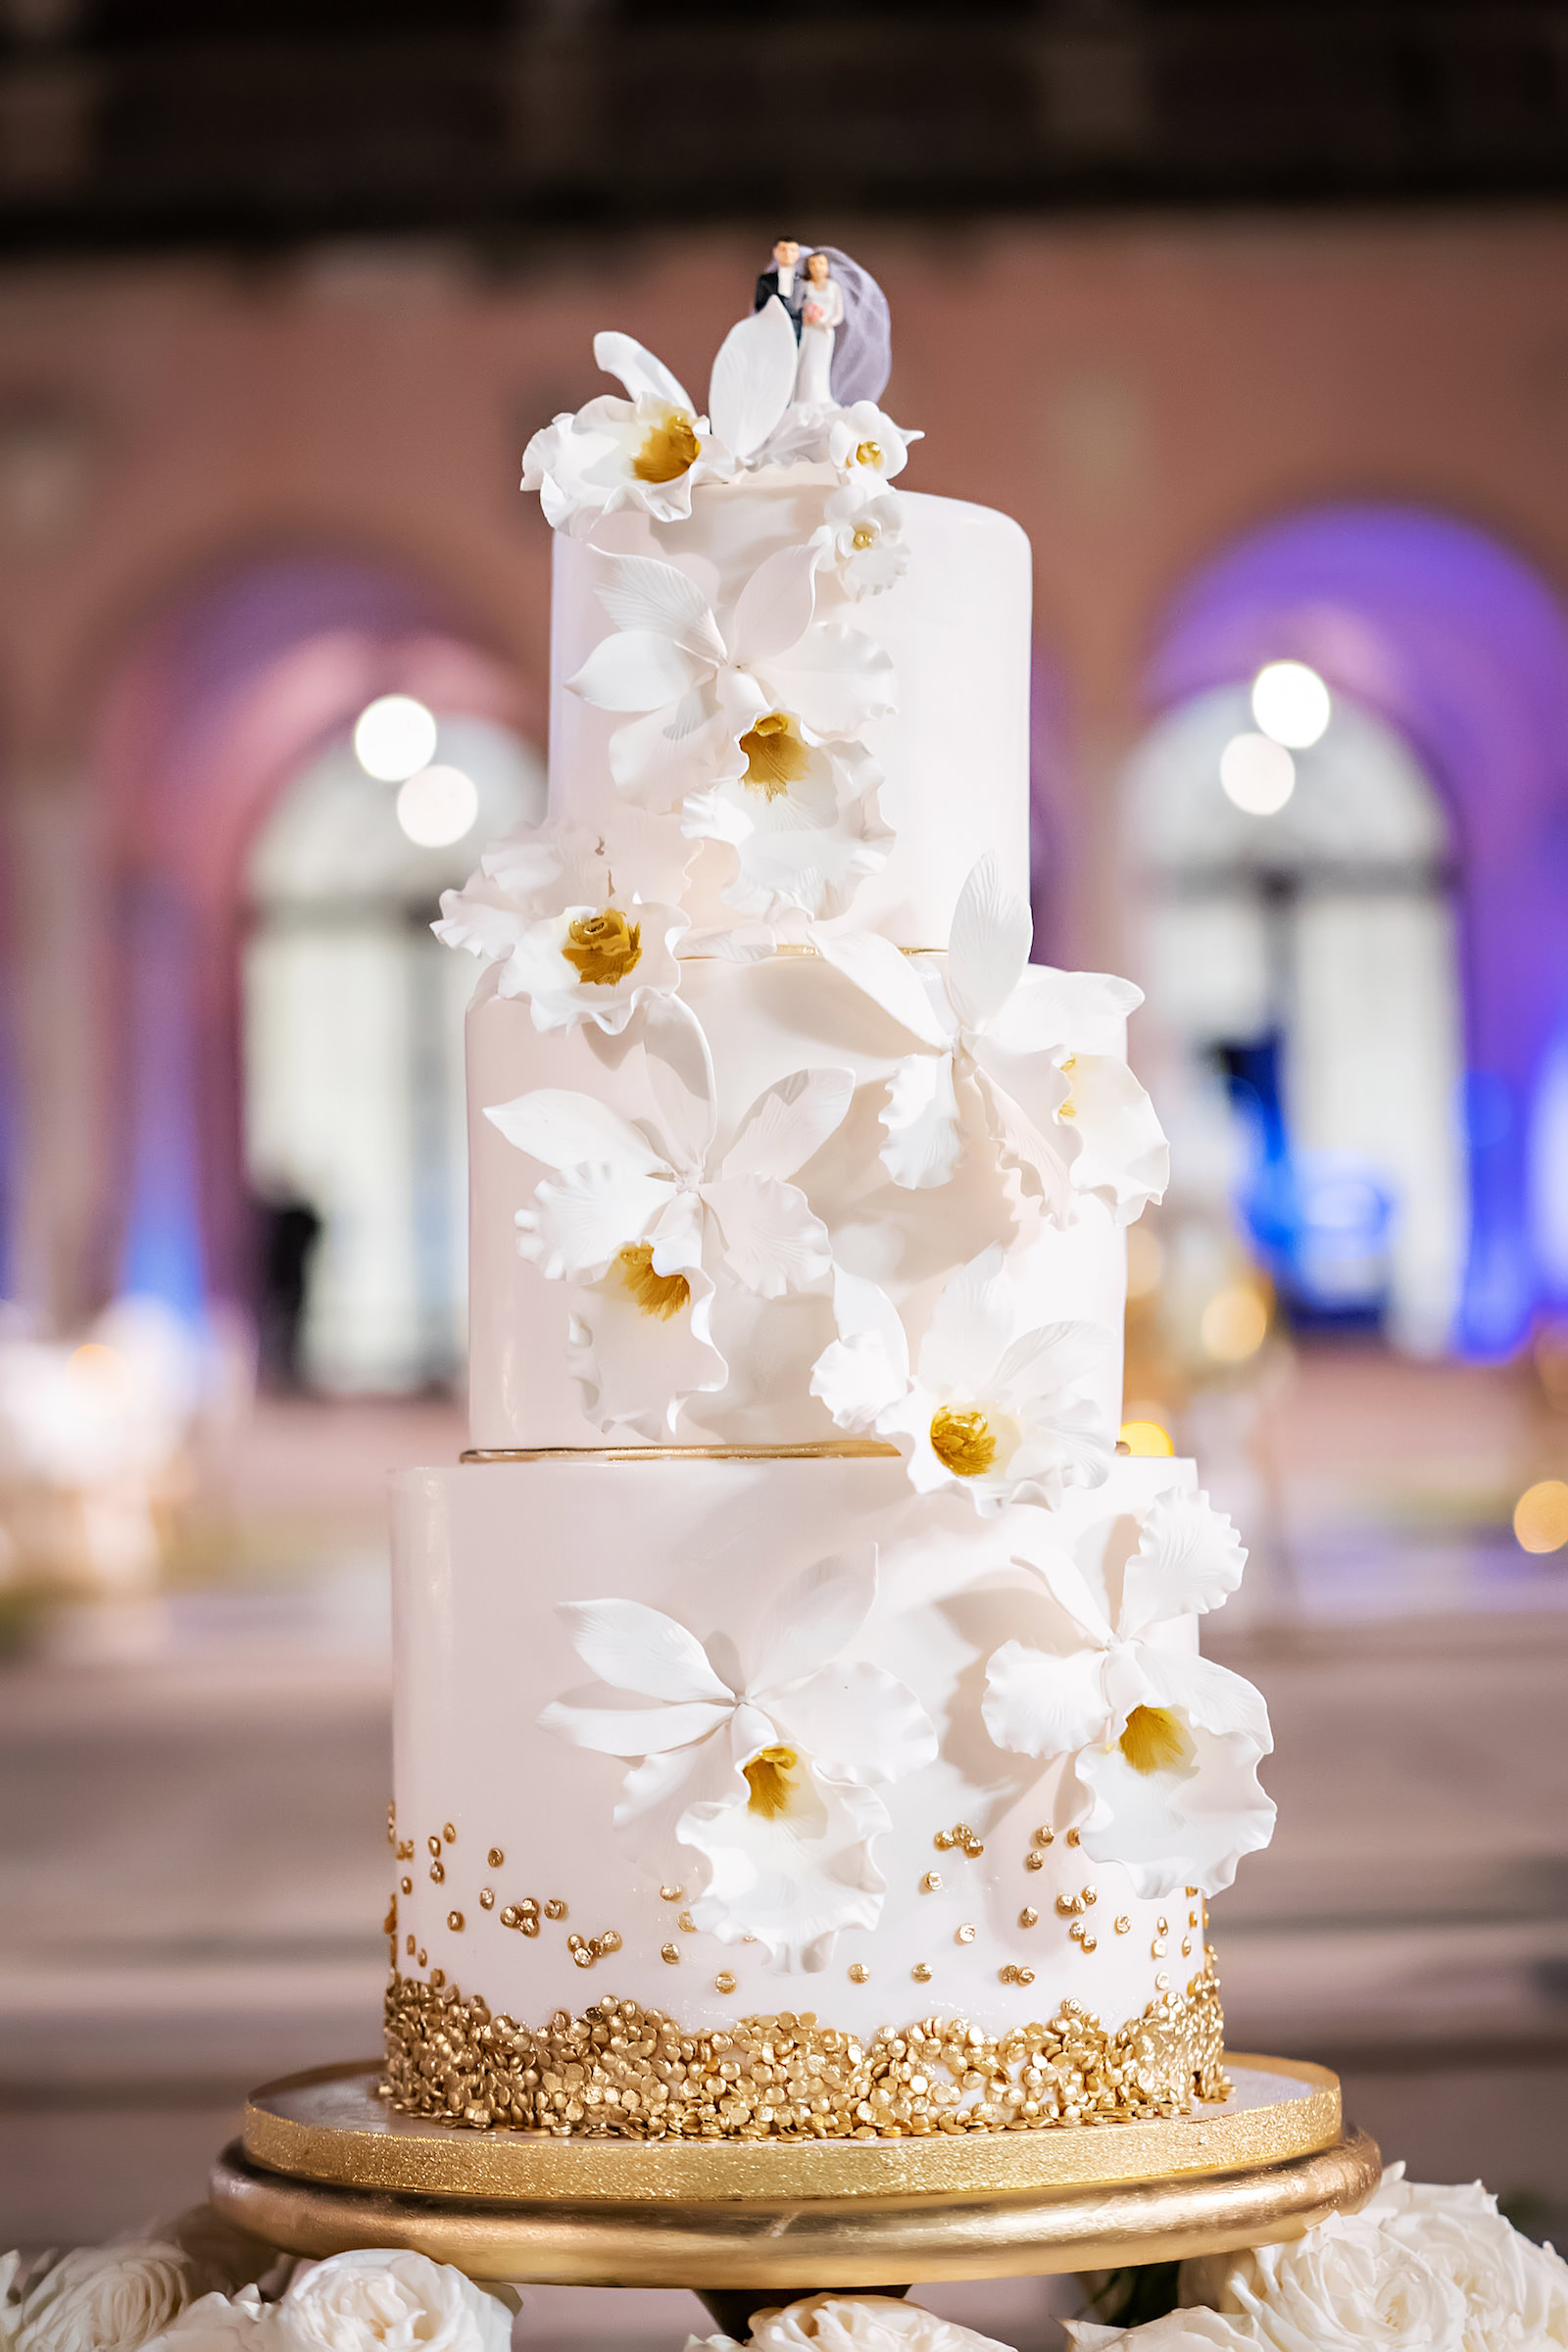 Three Tier White and Wedding Cake with White Sugar Flowers Cascading | Tampa Bay Wedding Photographer Limelight Photography